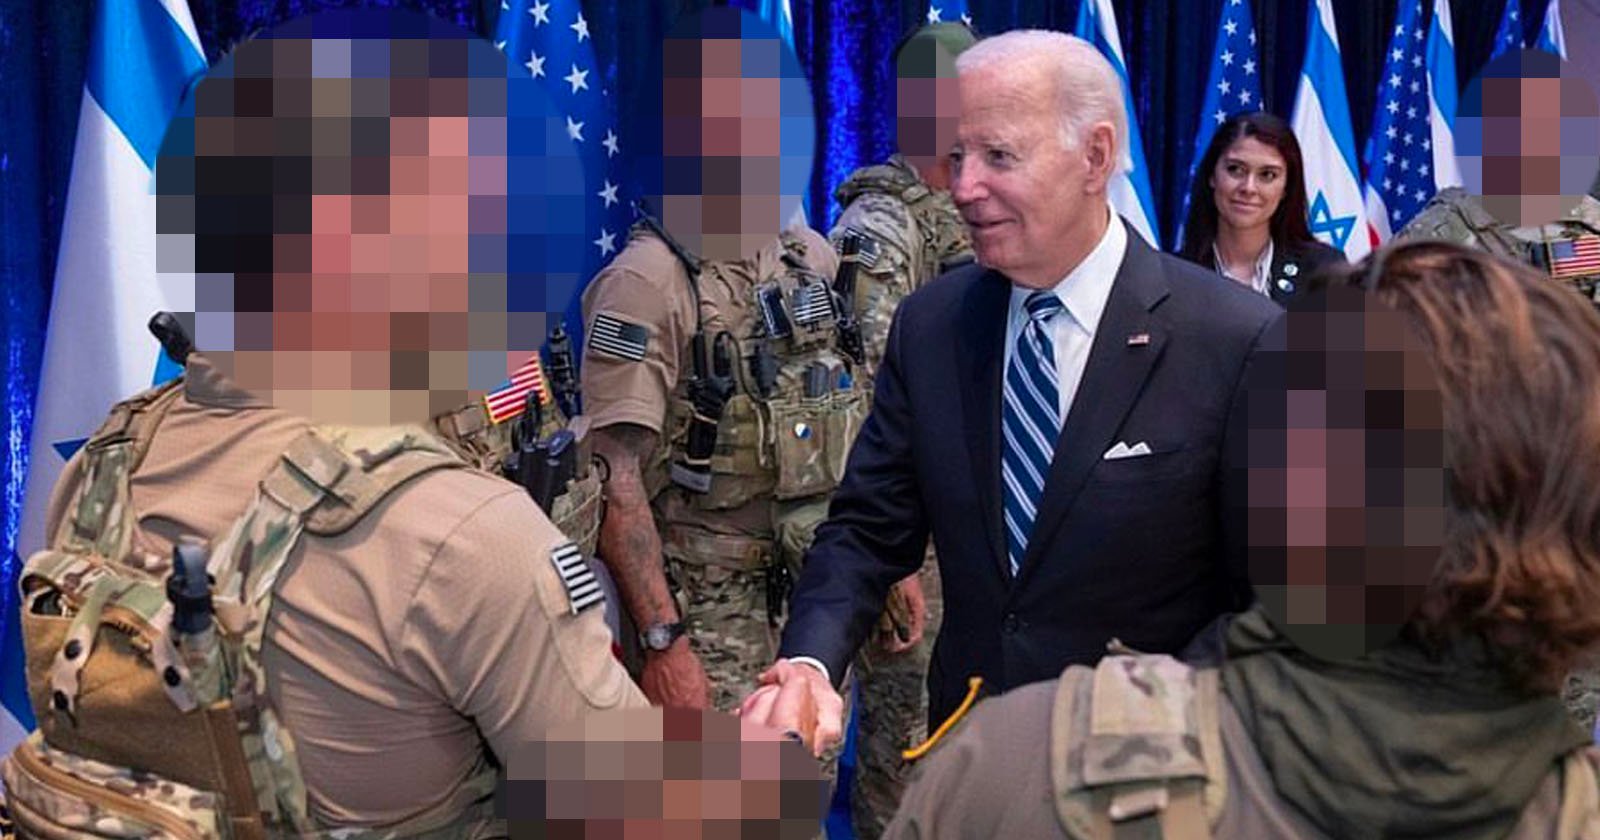  white house accidentally posts photo revealing identity special 